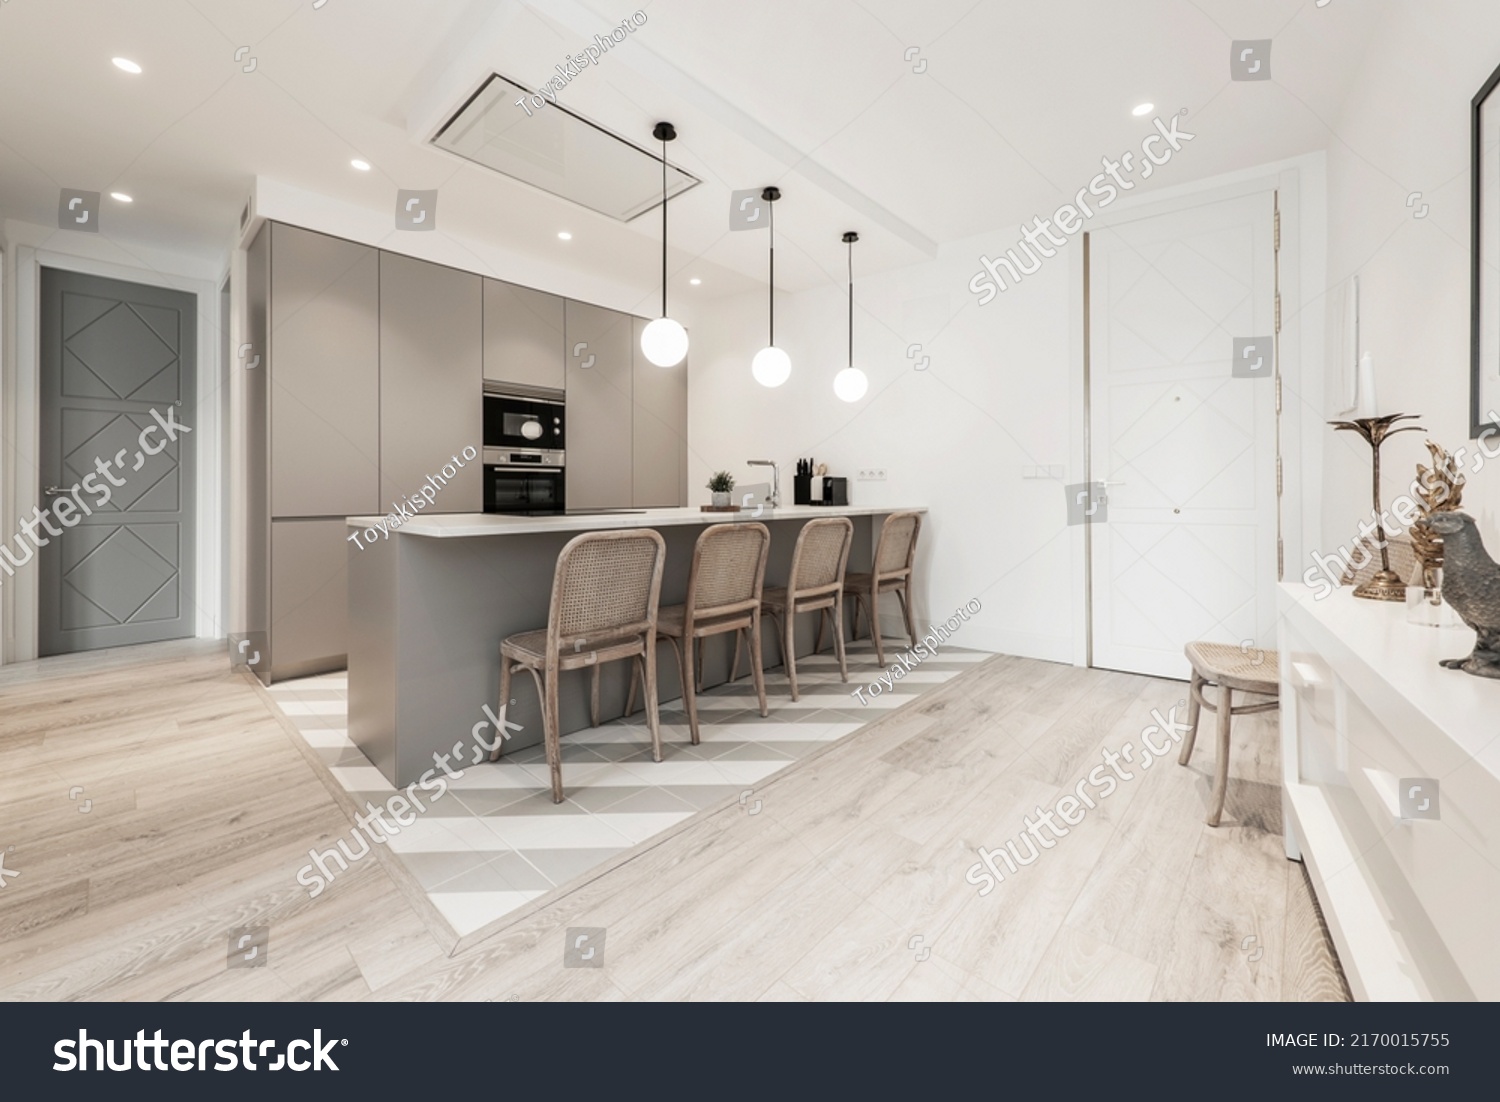 Stock Photo Modern Kitchen Island With Dining Chairs White Wooden Sideboard And Gray Furniture Columns 2170015755 